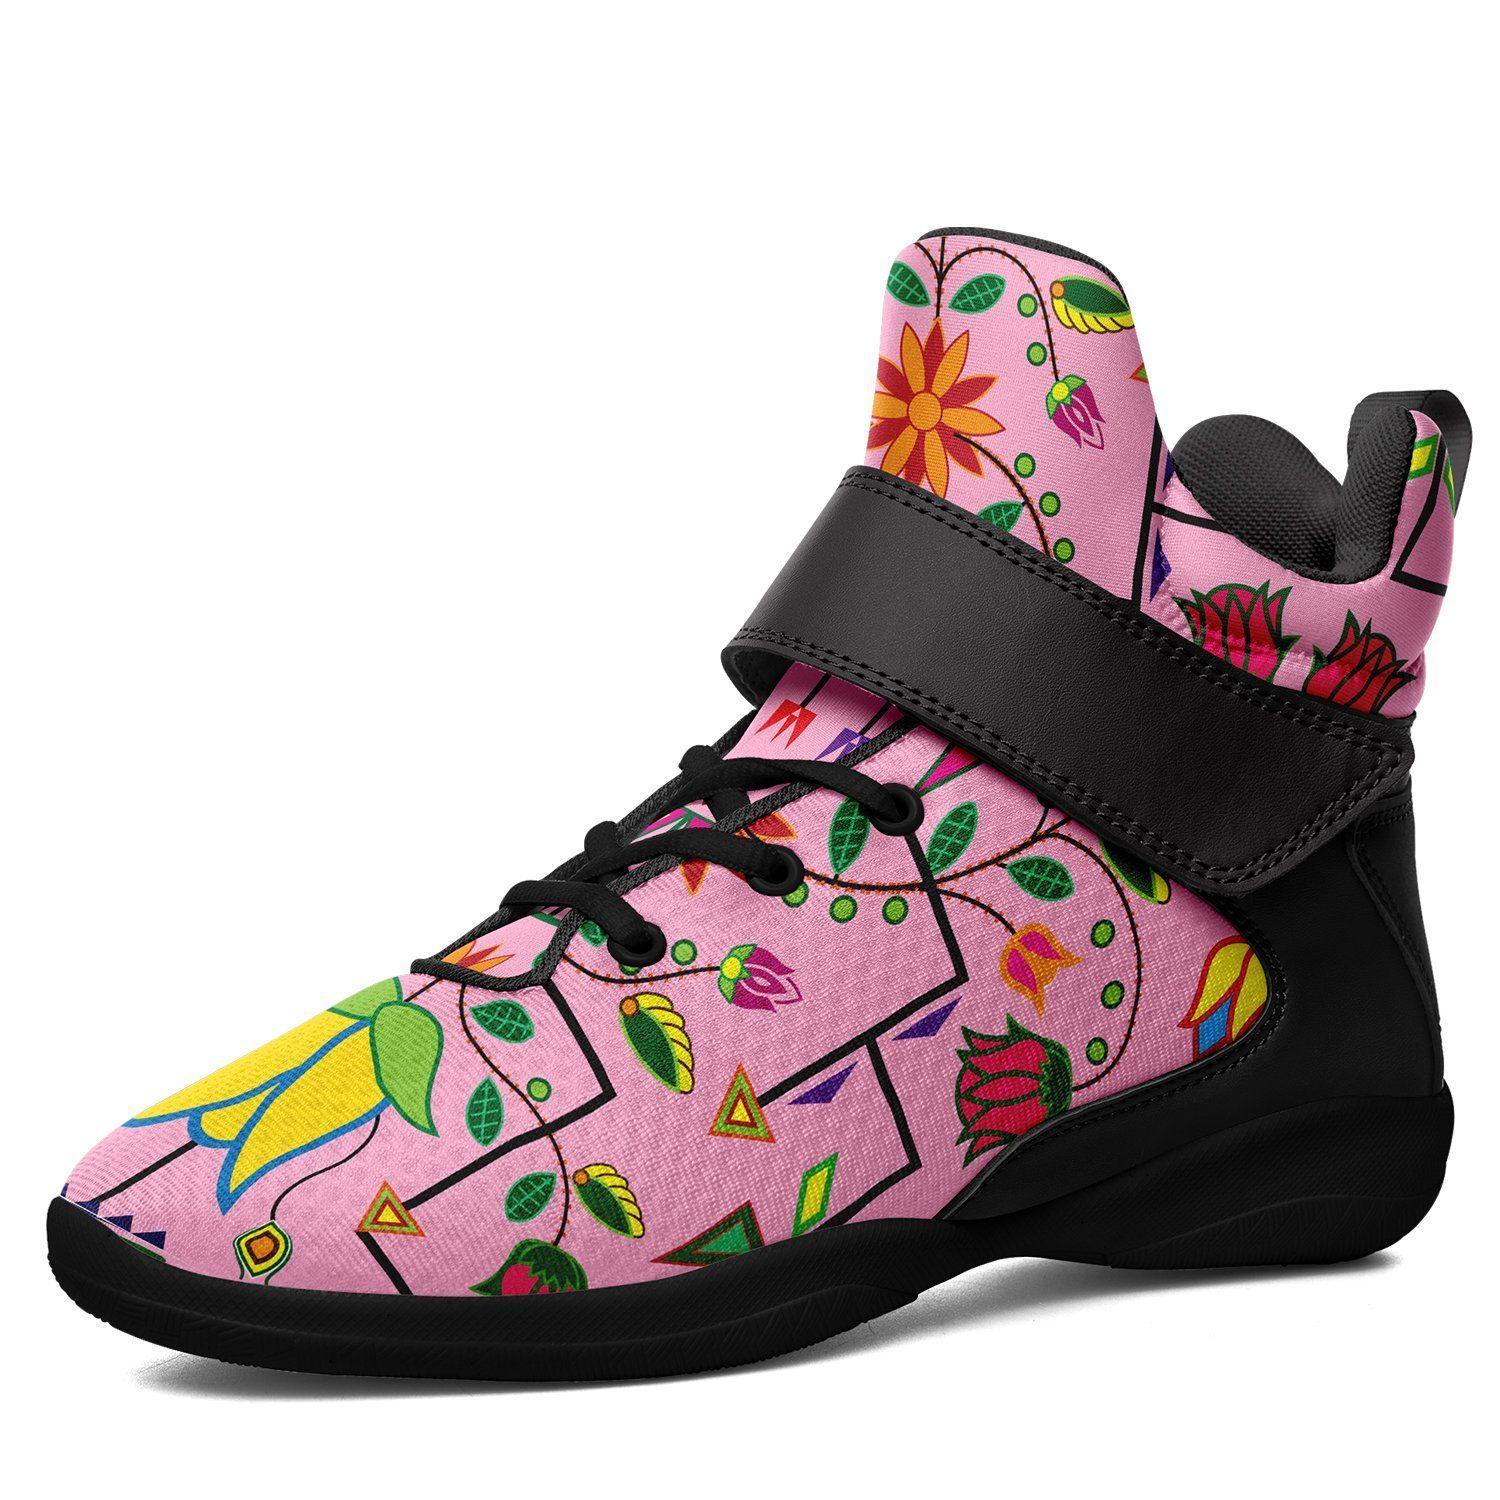 Geometric Floral Summer Sunset Ipottaa Basketball / Sport High Top Shoes - Black Sole 49 Dzine US Men 7 / EUR 40 Black Sole with Black Strap 